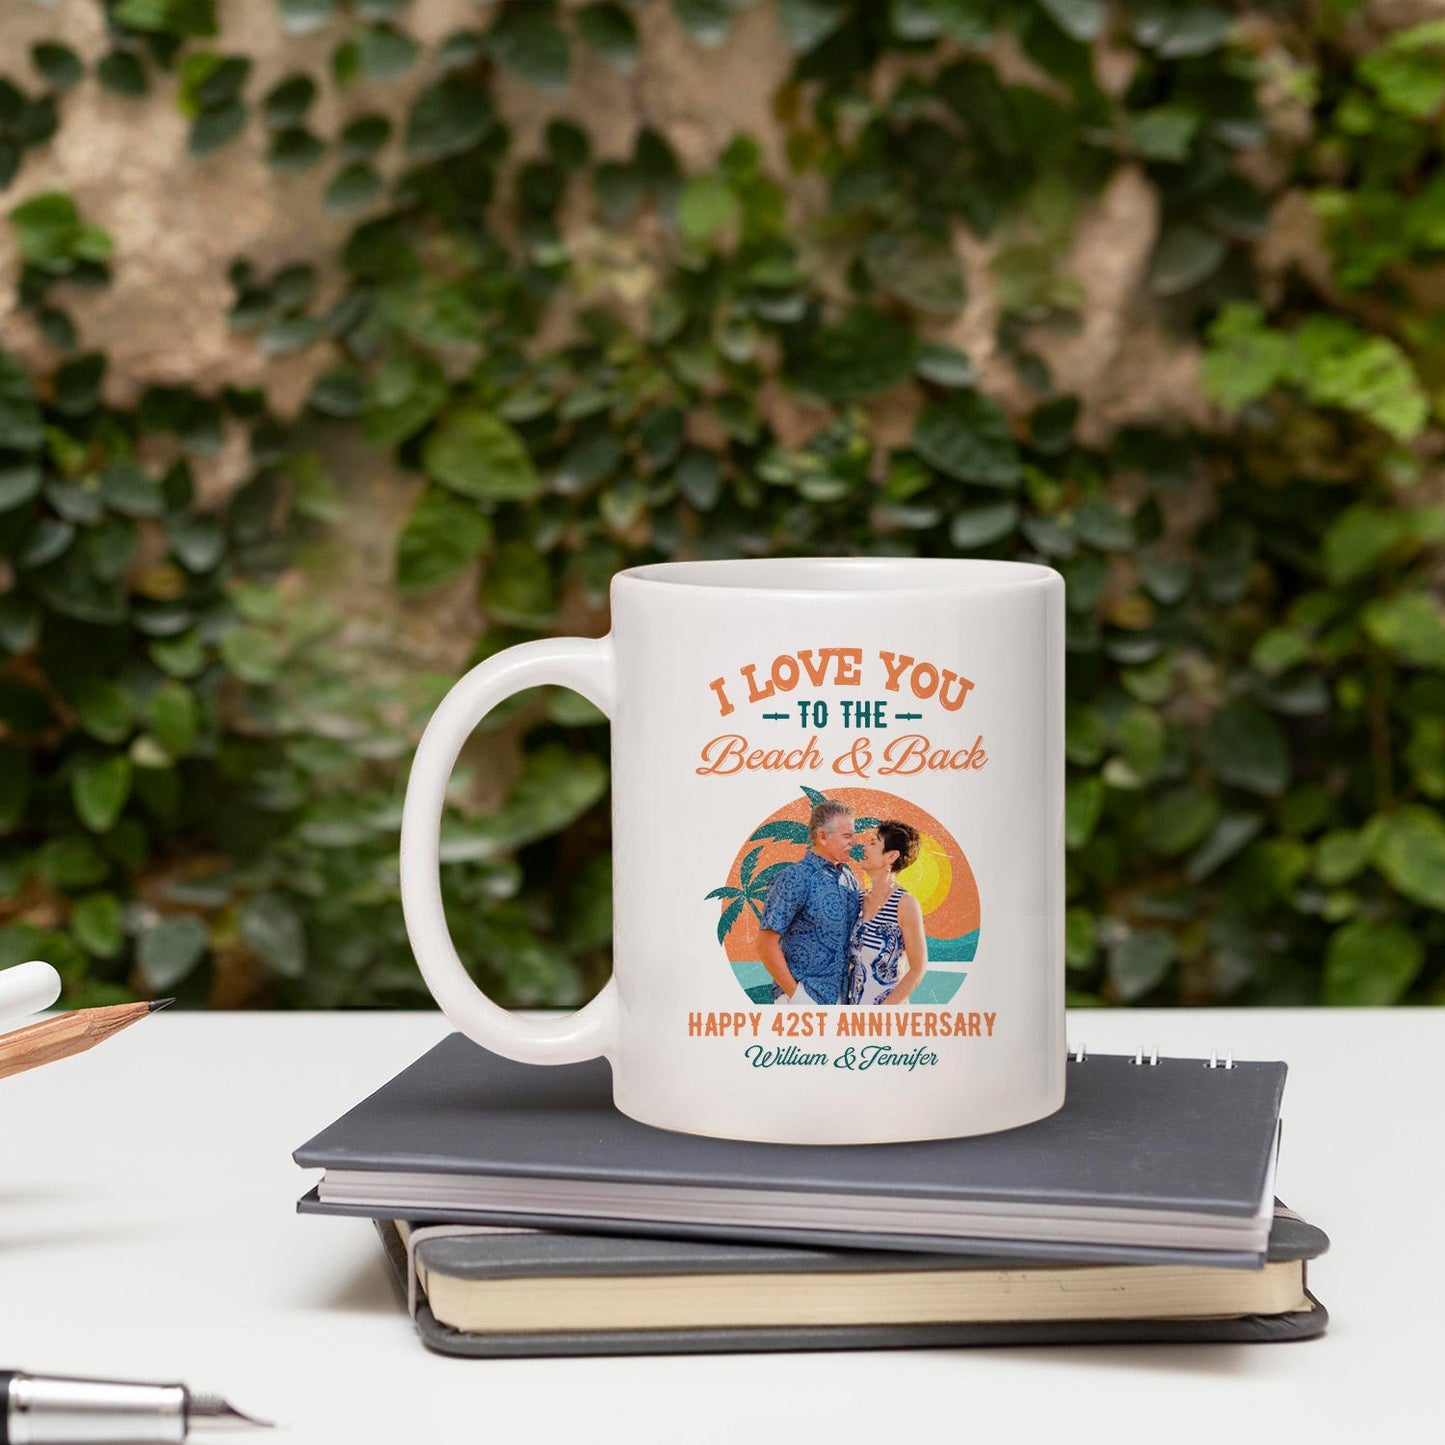 I Love You To The Beach And Back - Personalized 42 Year Anniversary gift For Parents, Husband or Wife - Custom Mug - MyMindfulGifts